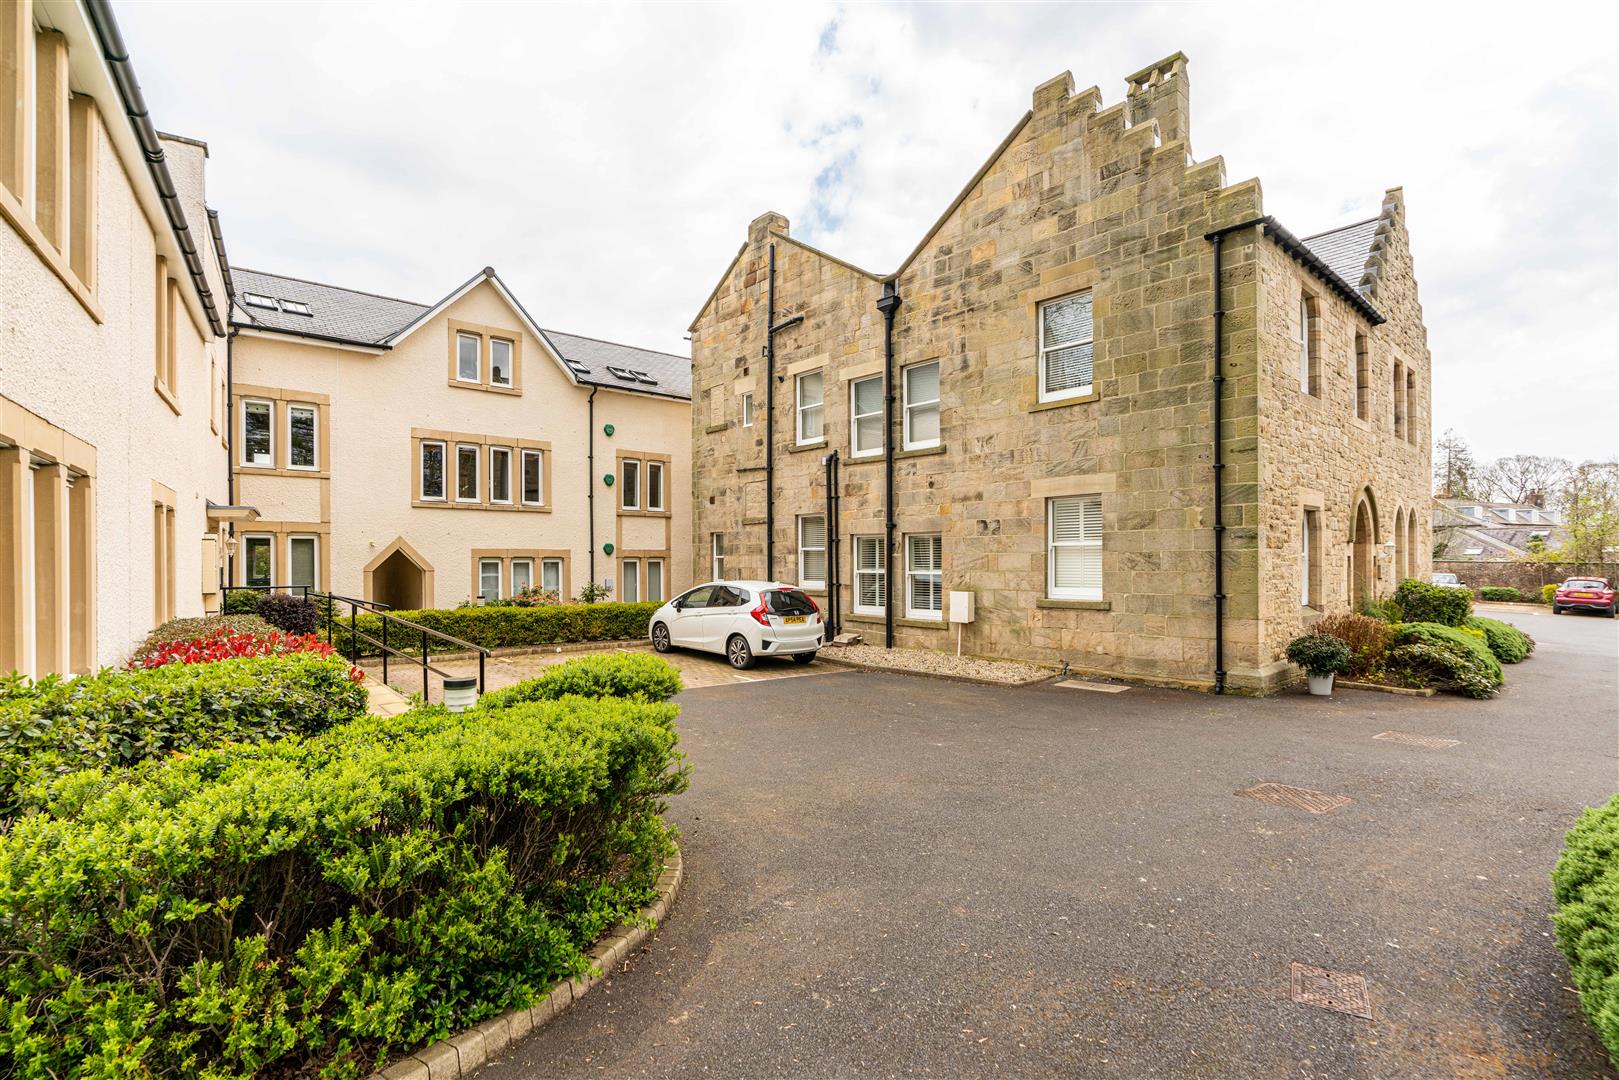 1 bed apartment for sale in Main Street, Ponteland, NE20